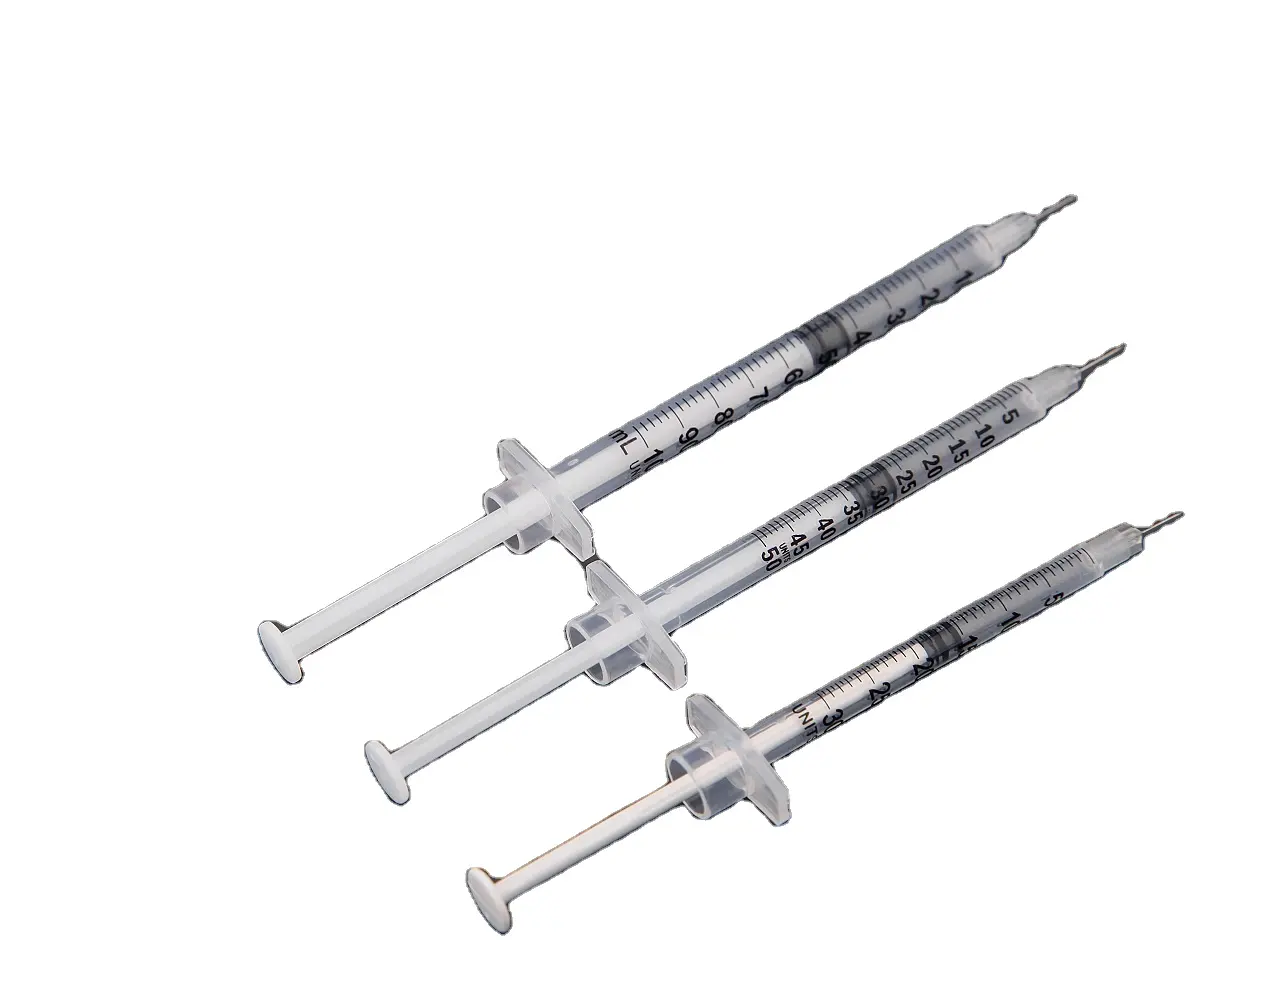 Sterile Disposable Medical Painless Insulin Syringe With Fixed Fine Needle U-40 U-100 0.3ml 0.5ml 1ml For Painless Injection